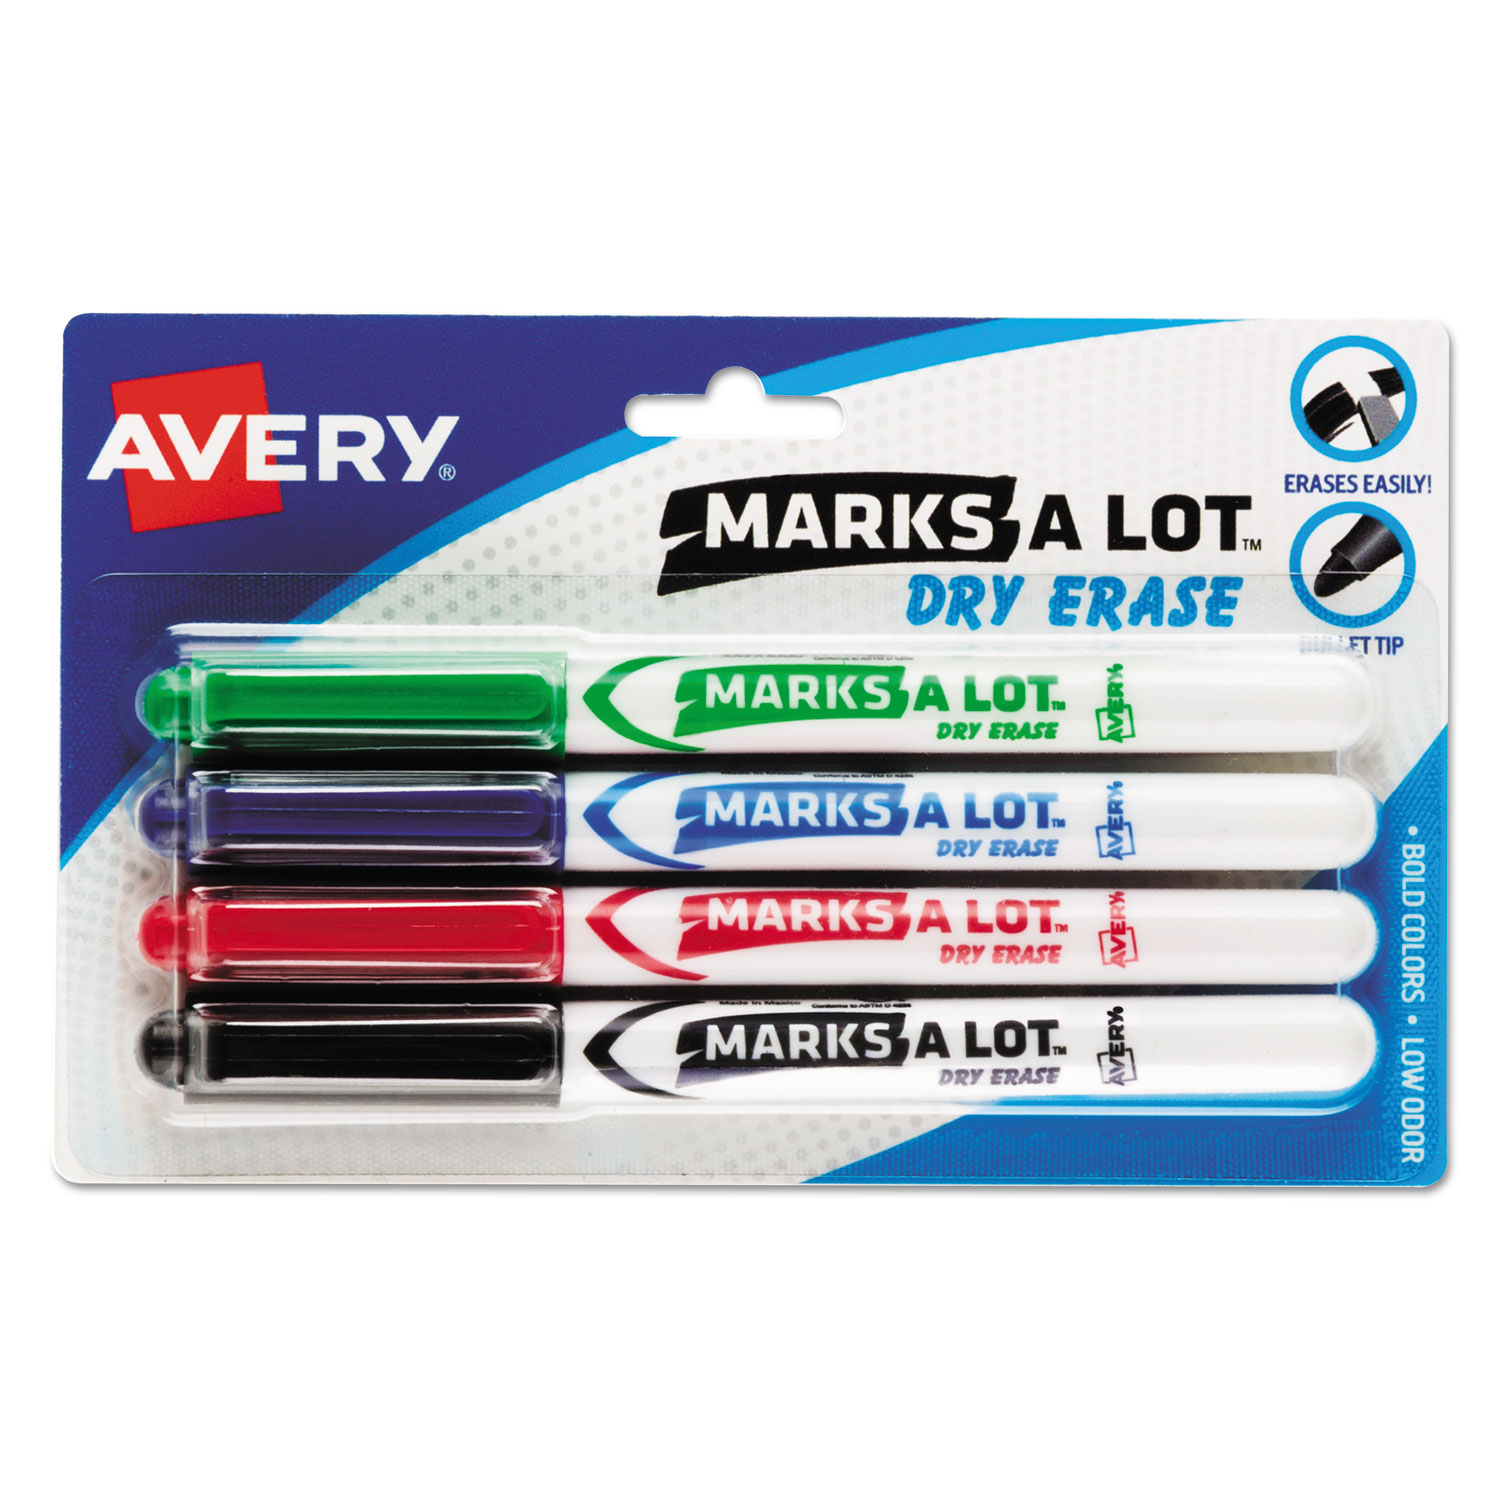  Avery 24459 MARKS A LOT Pen-Style Dry Erase Marker, Medium Bullet Tip, Assorted Colors, 4/Set (AVE24459) 